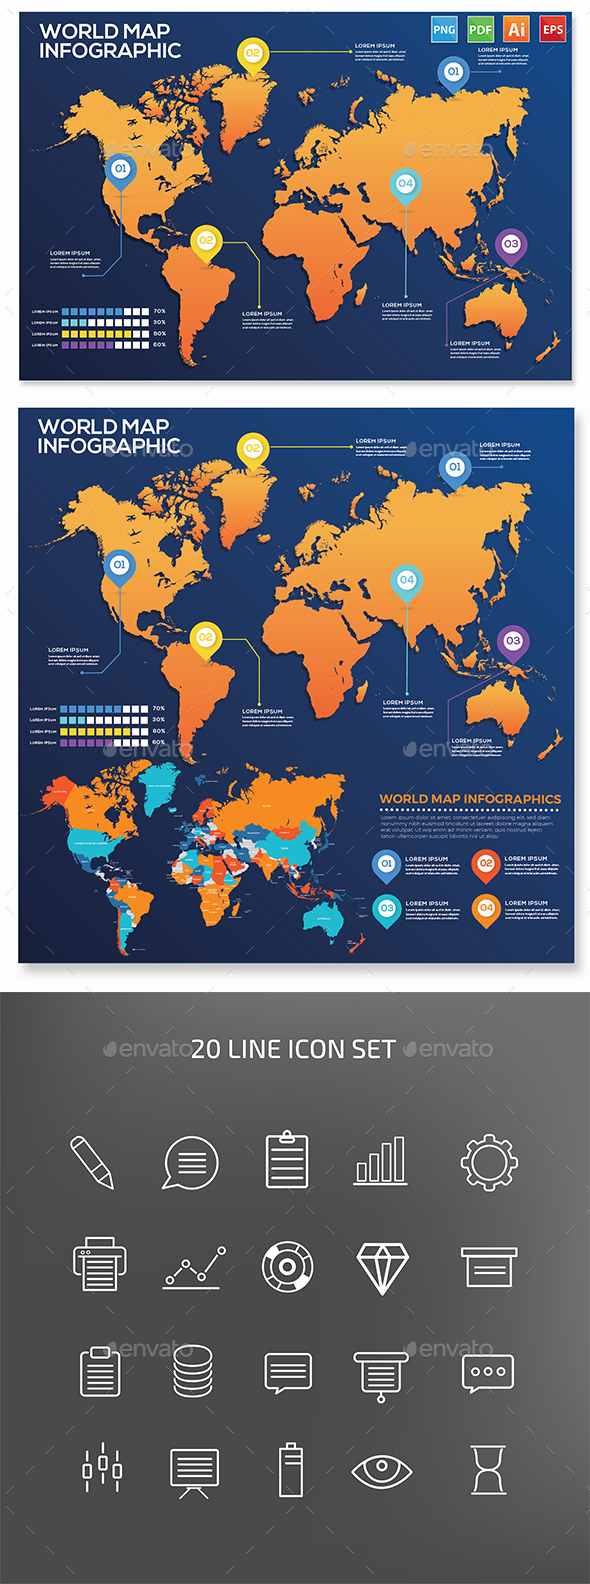 [DOWNLOAD]World Map Infographics